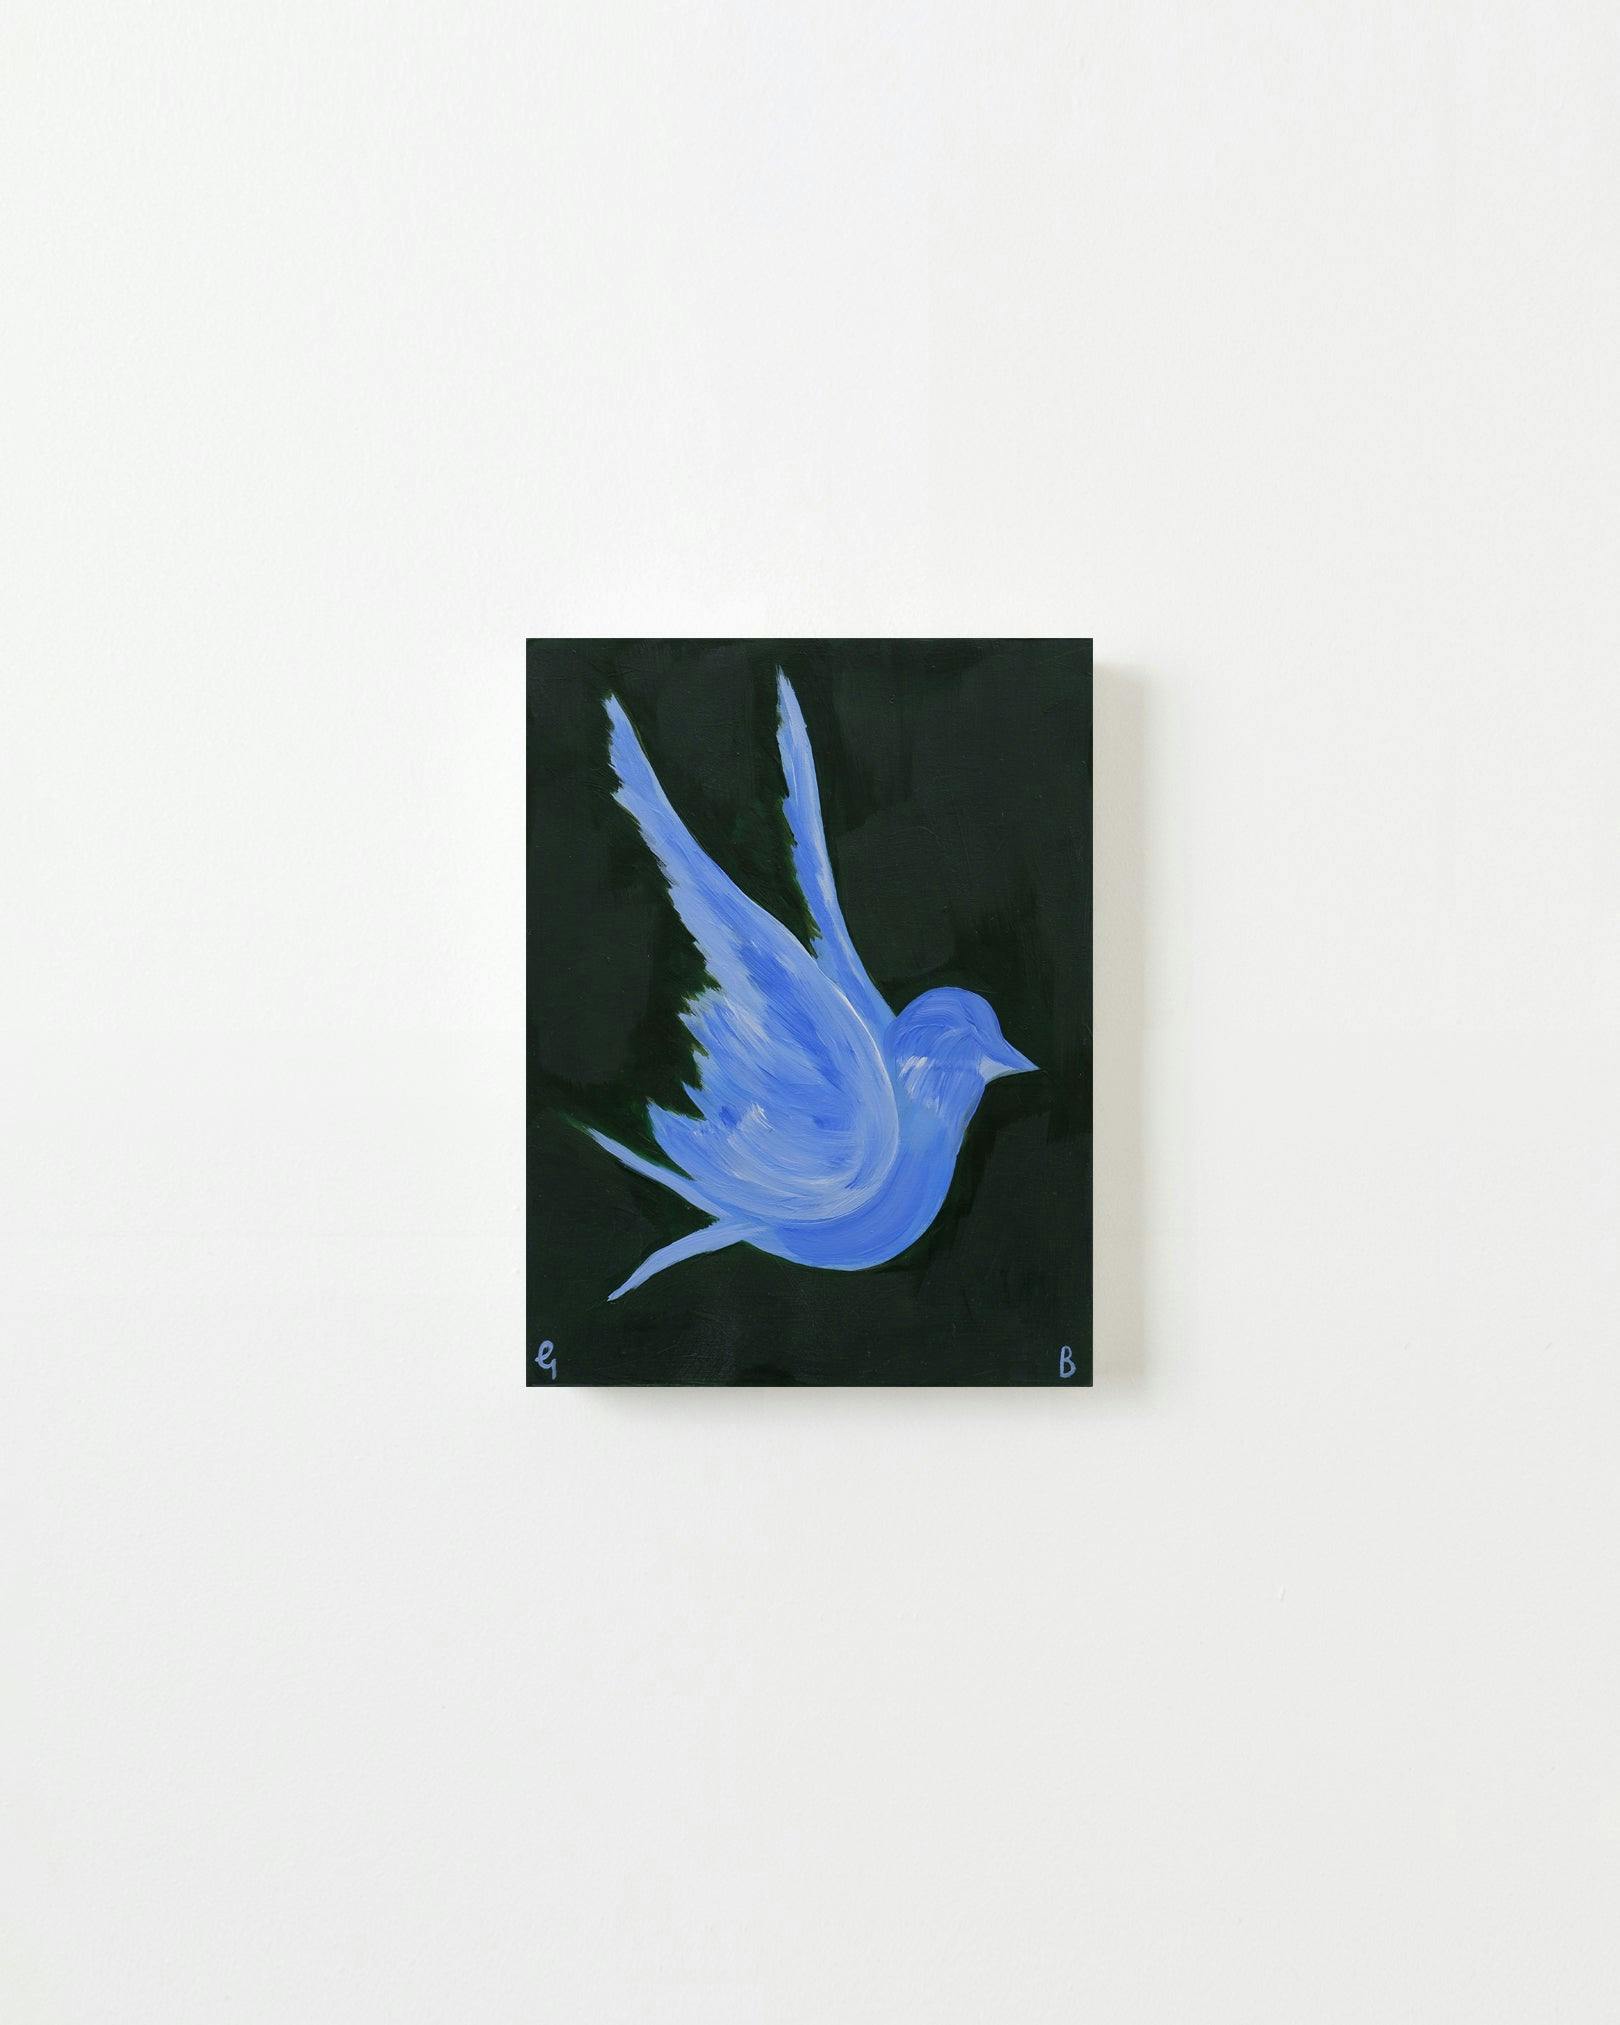 Painting by Georgia Beaumont titled "Blue Bird on Sap Green".